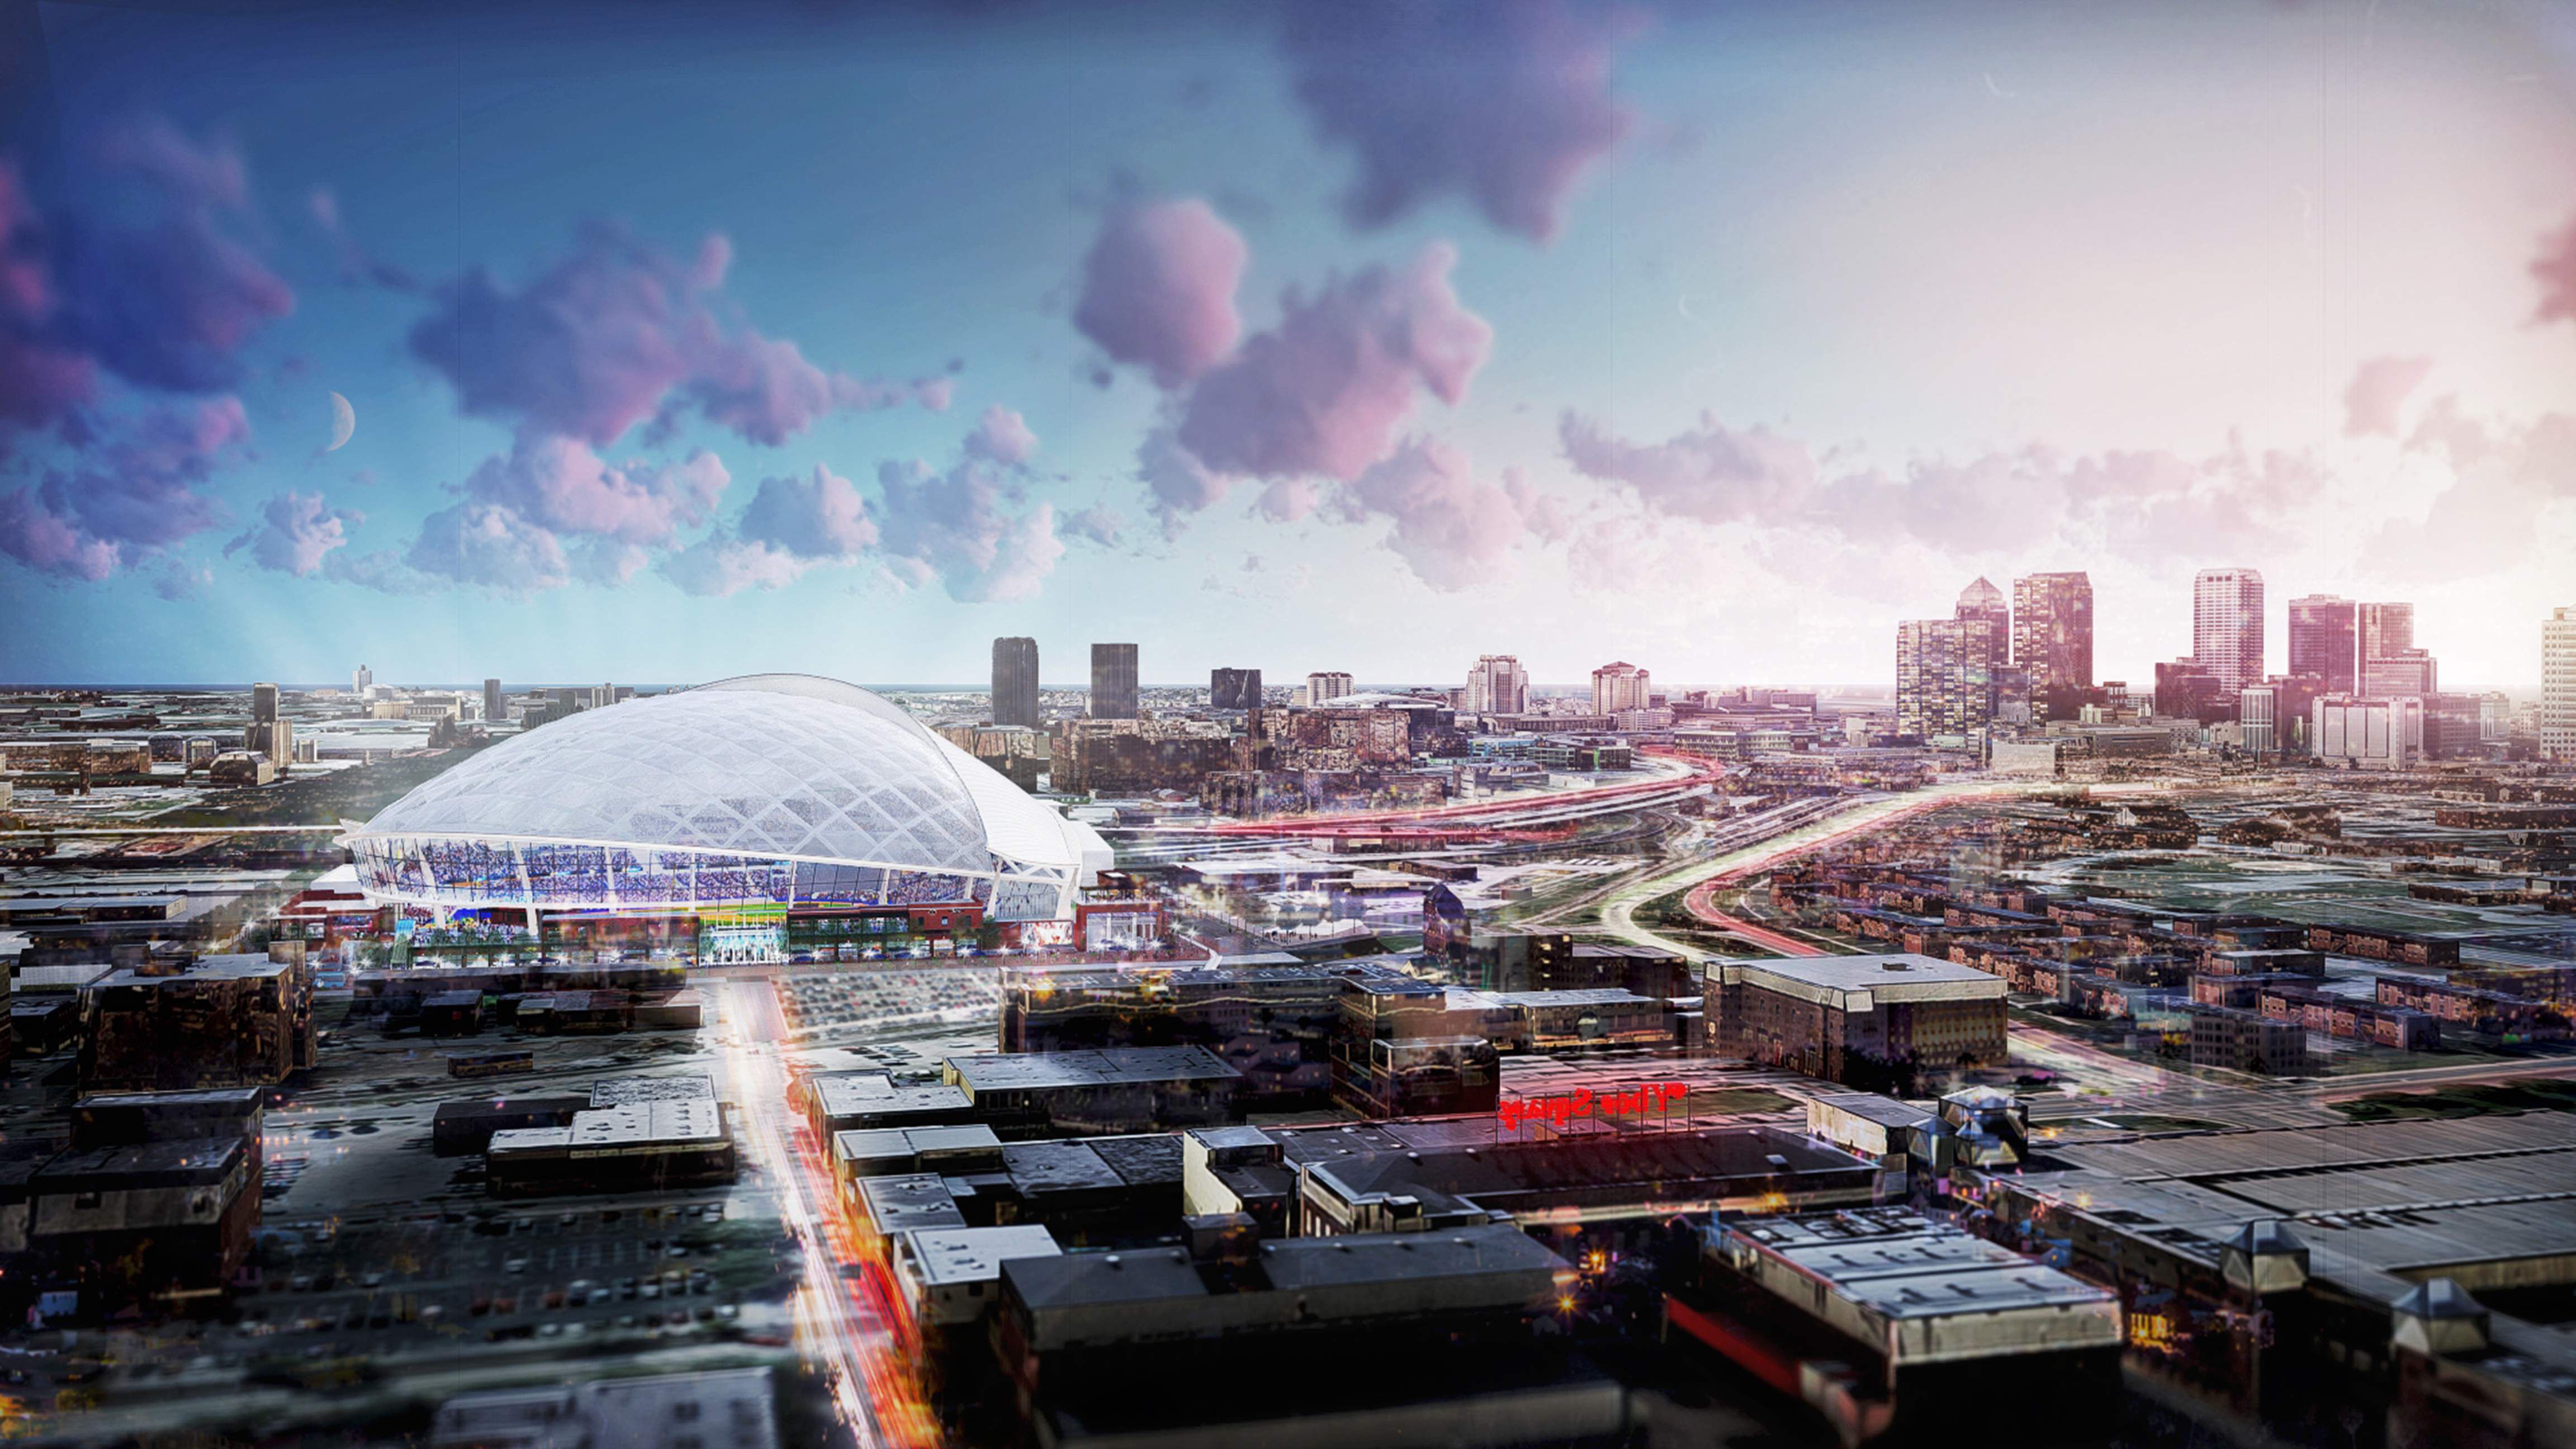 Tampa Bay Rays Release Renderings for New Populous-Designed